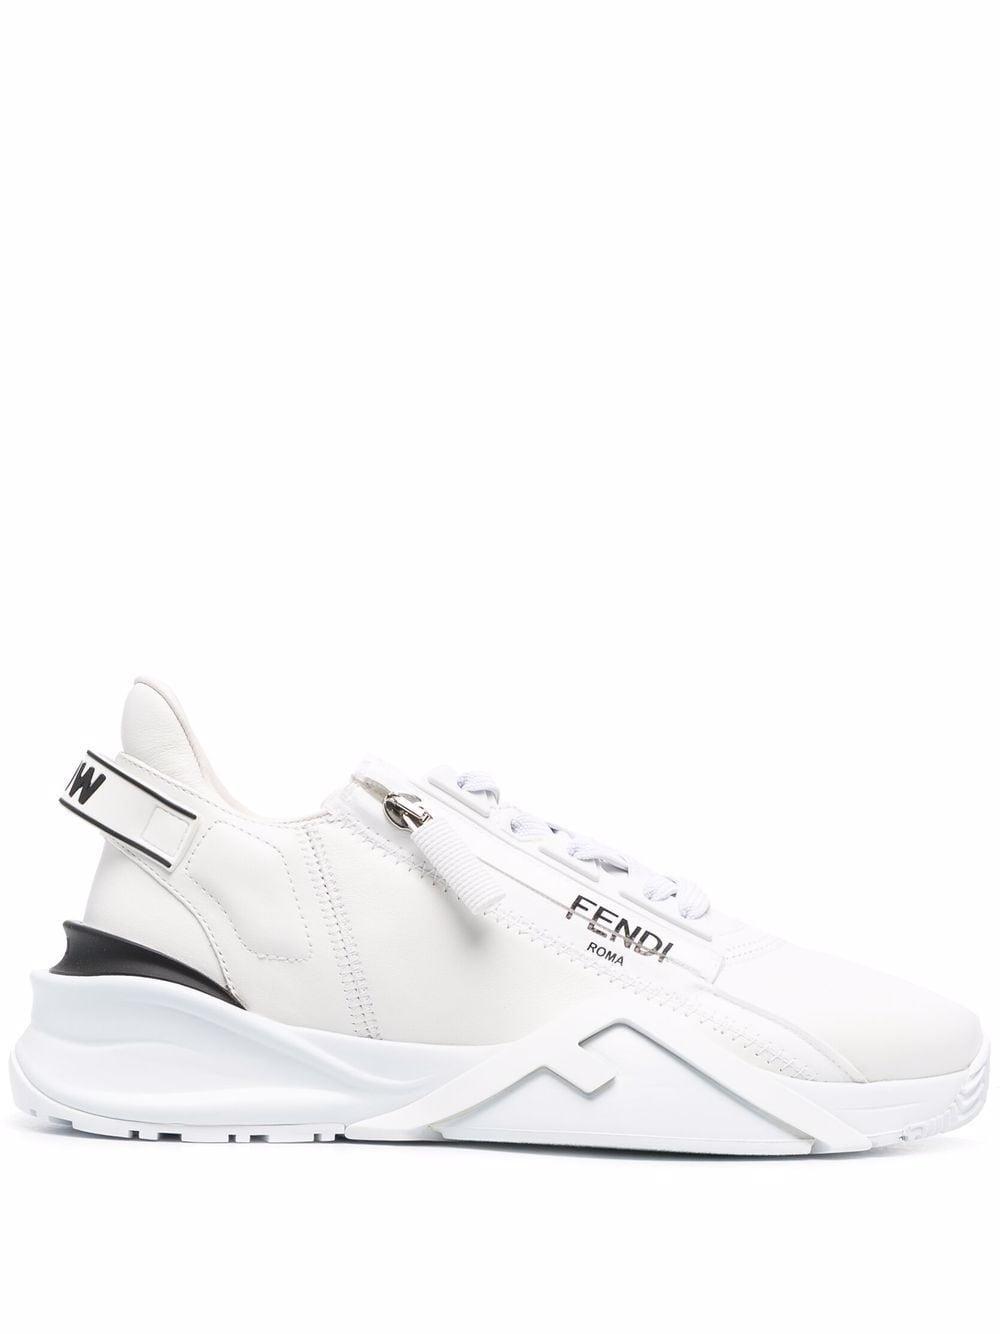 Fendi Flow Low-top Leather Sneakers in White - Save 21% - Lyst